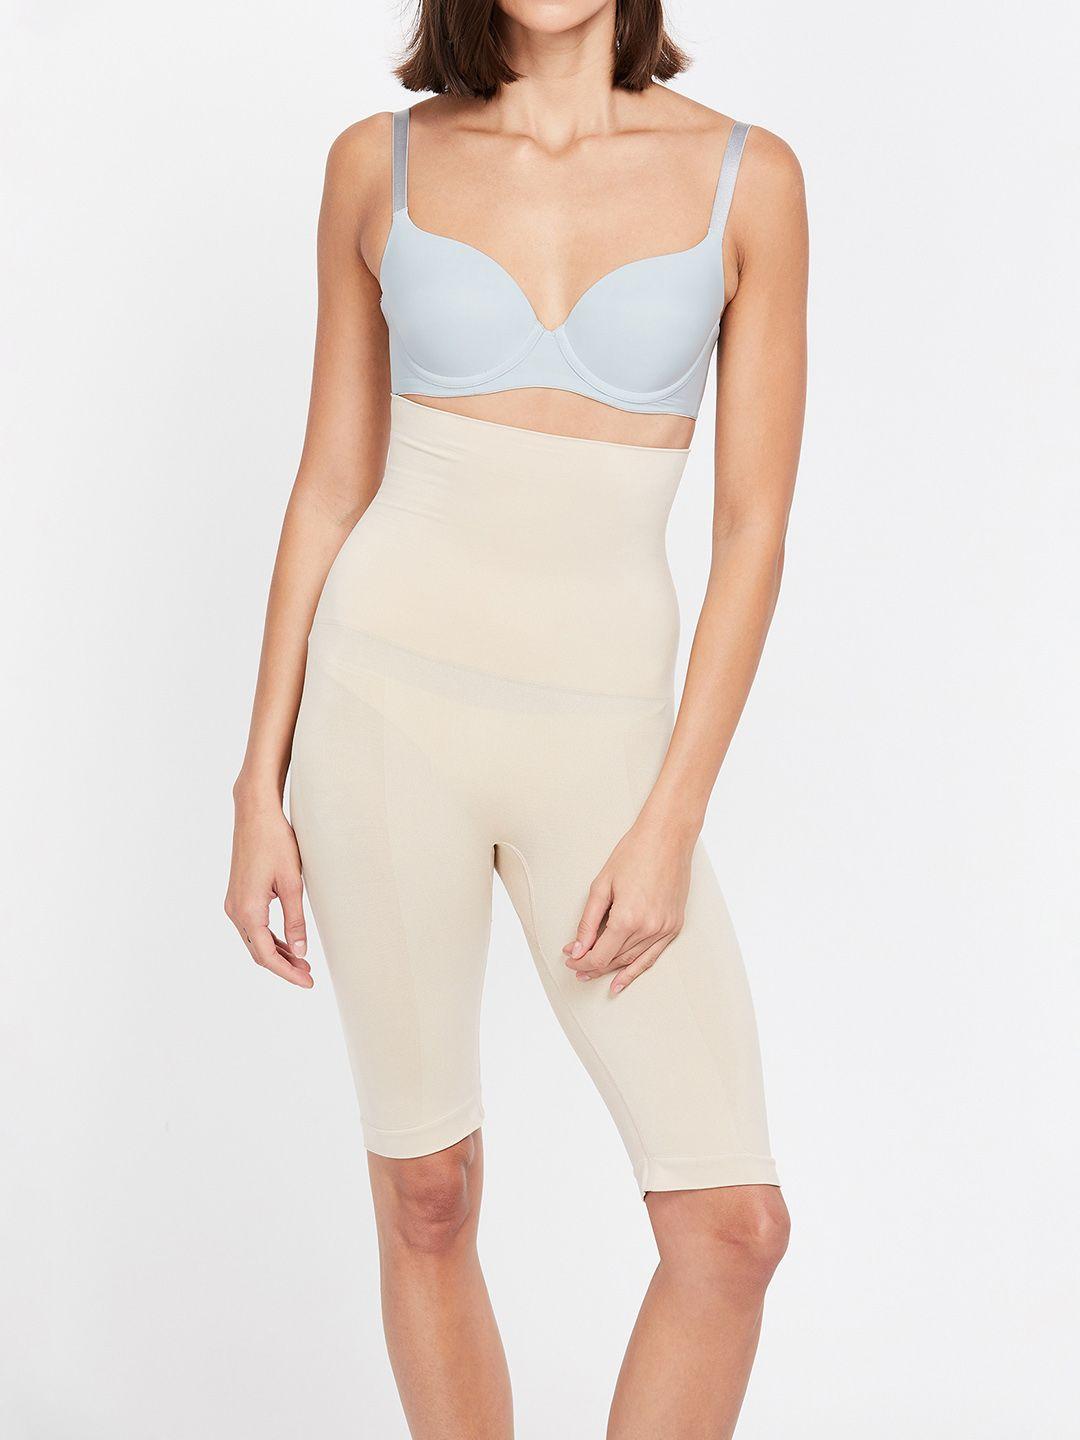 ginger by lifestyle women beige solid body shaper